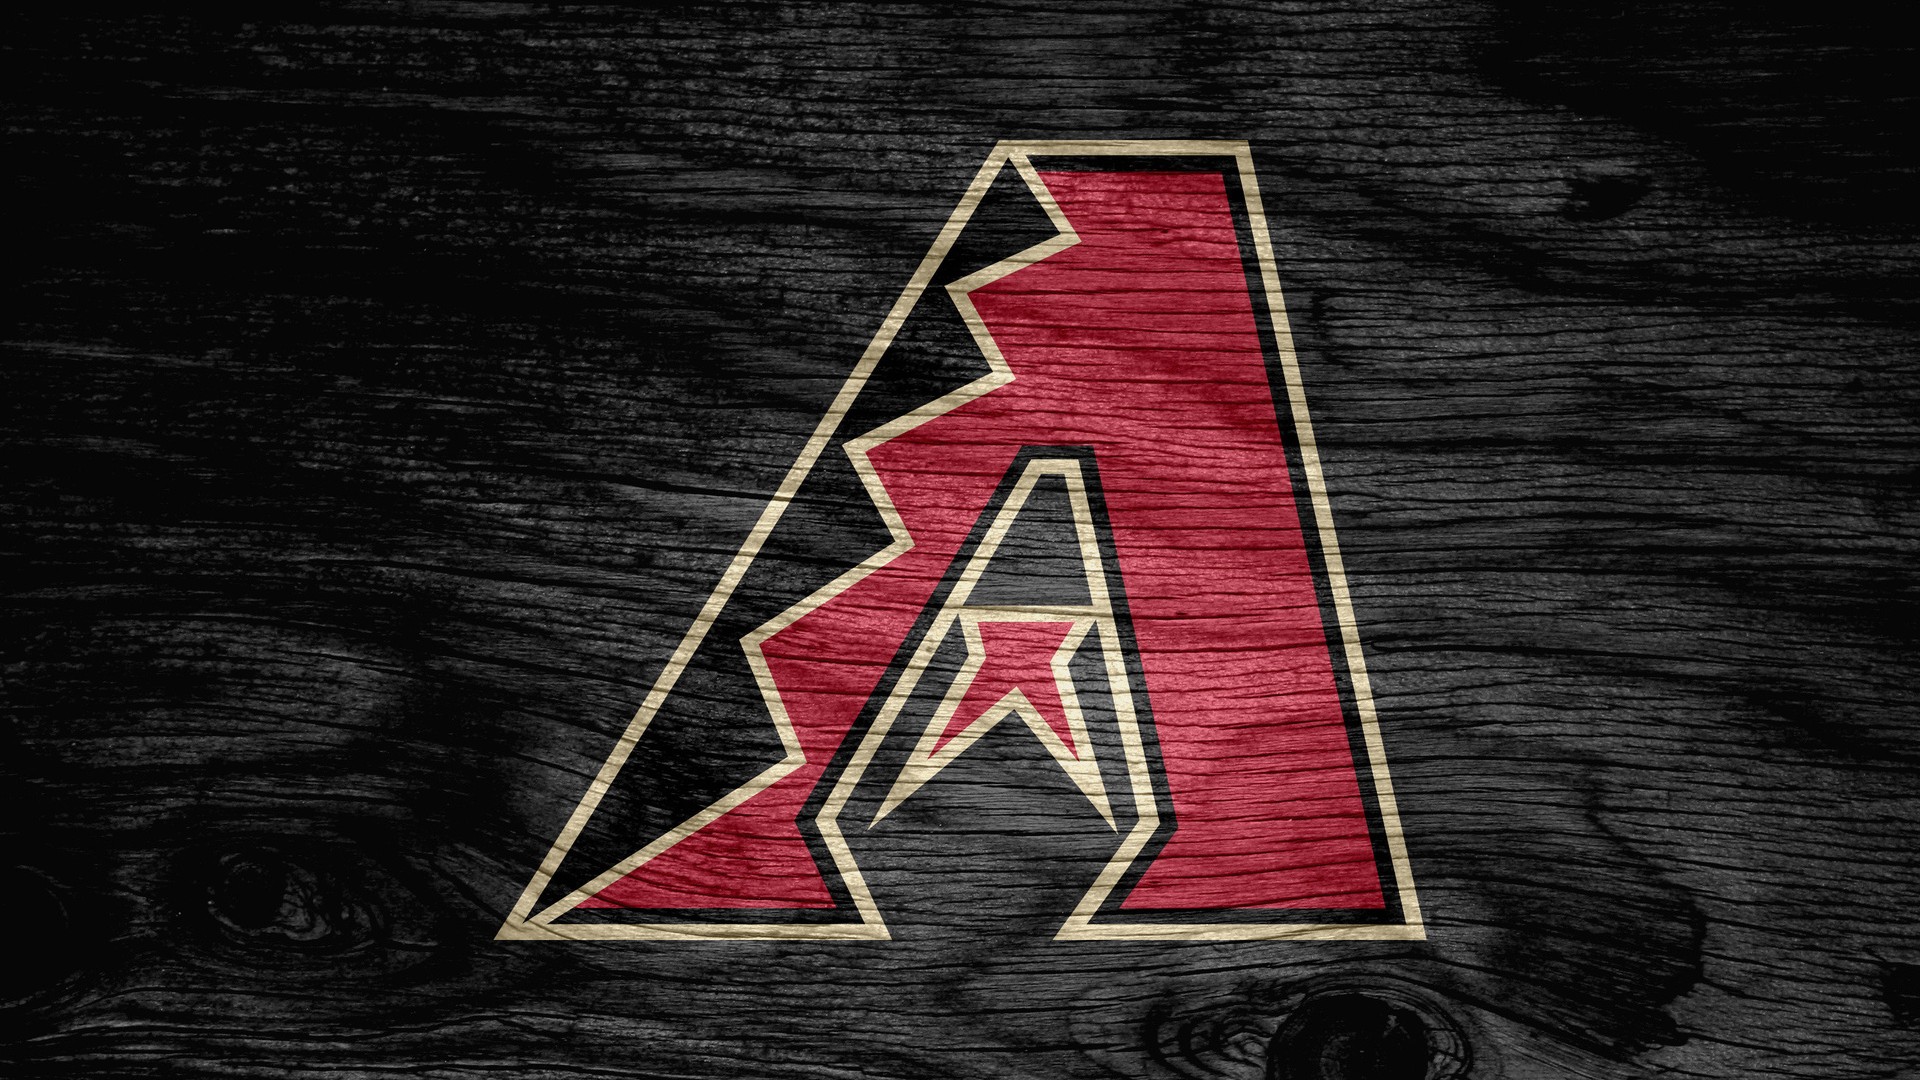 Arizona Diamondbacks MLB For Desktop Wallpaper with high-resolution 1920x1080 pixel. You can use this wallpaper for Mac Desktop Wallpaper, Laptop Screensavers, Android Wallpapers, Tablet or iPhone Home Screen and another mobile phone device